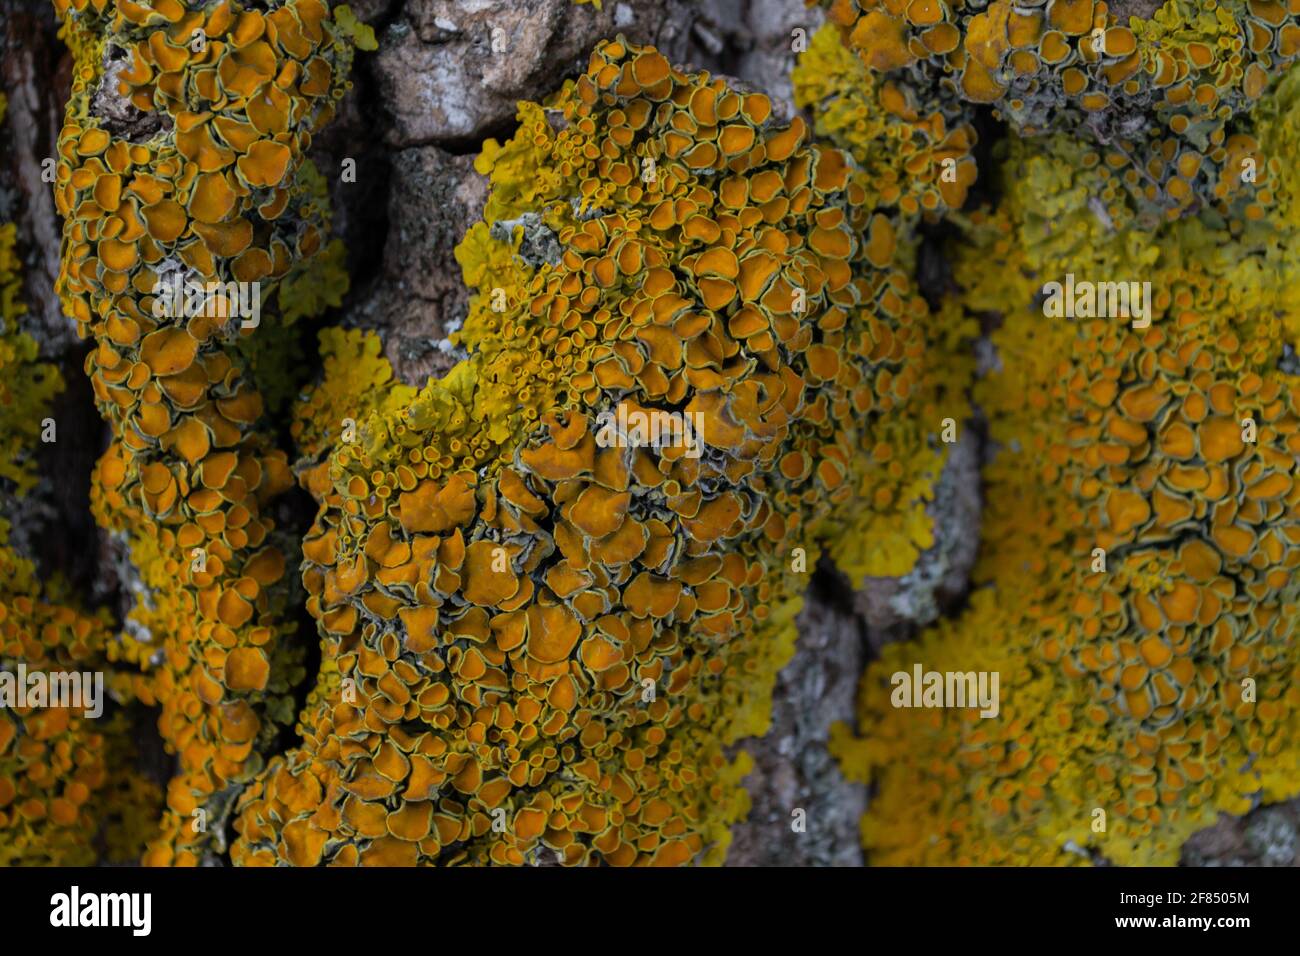 A bright yellow lichen has grown on the bark of the tree. Composite organism living on the bark of trees Stock Photo